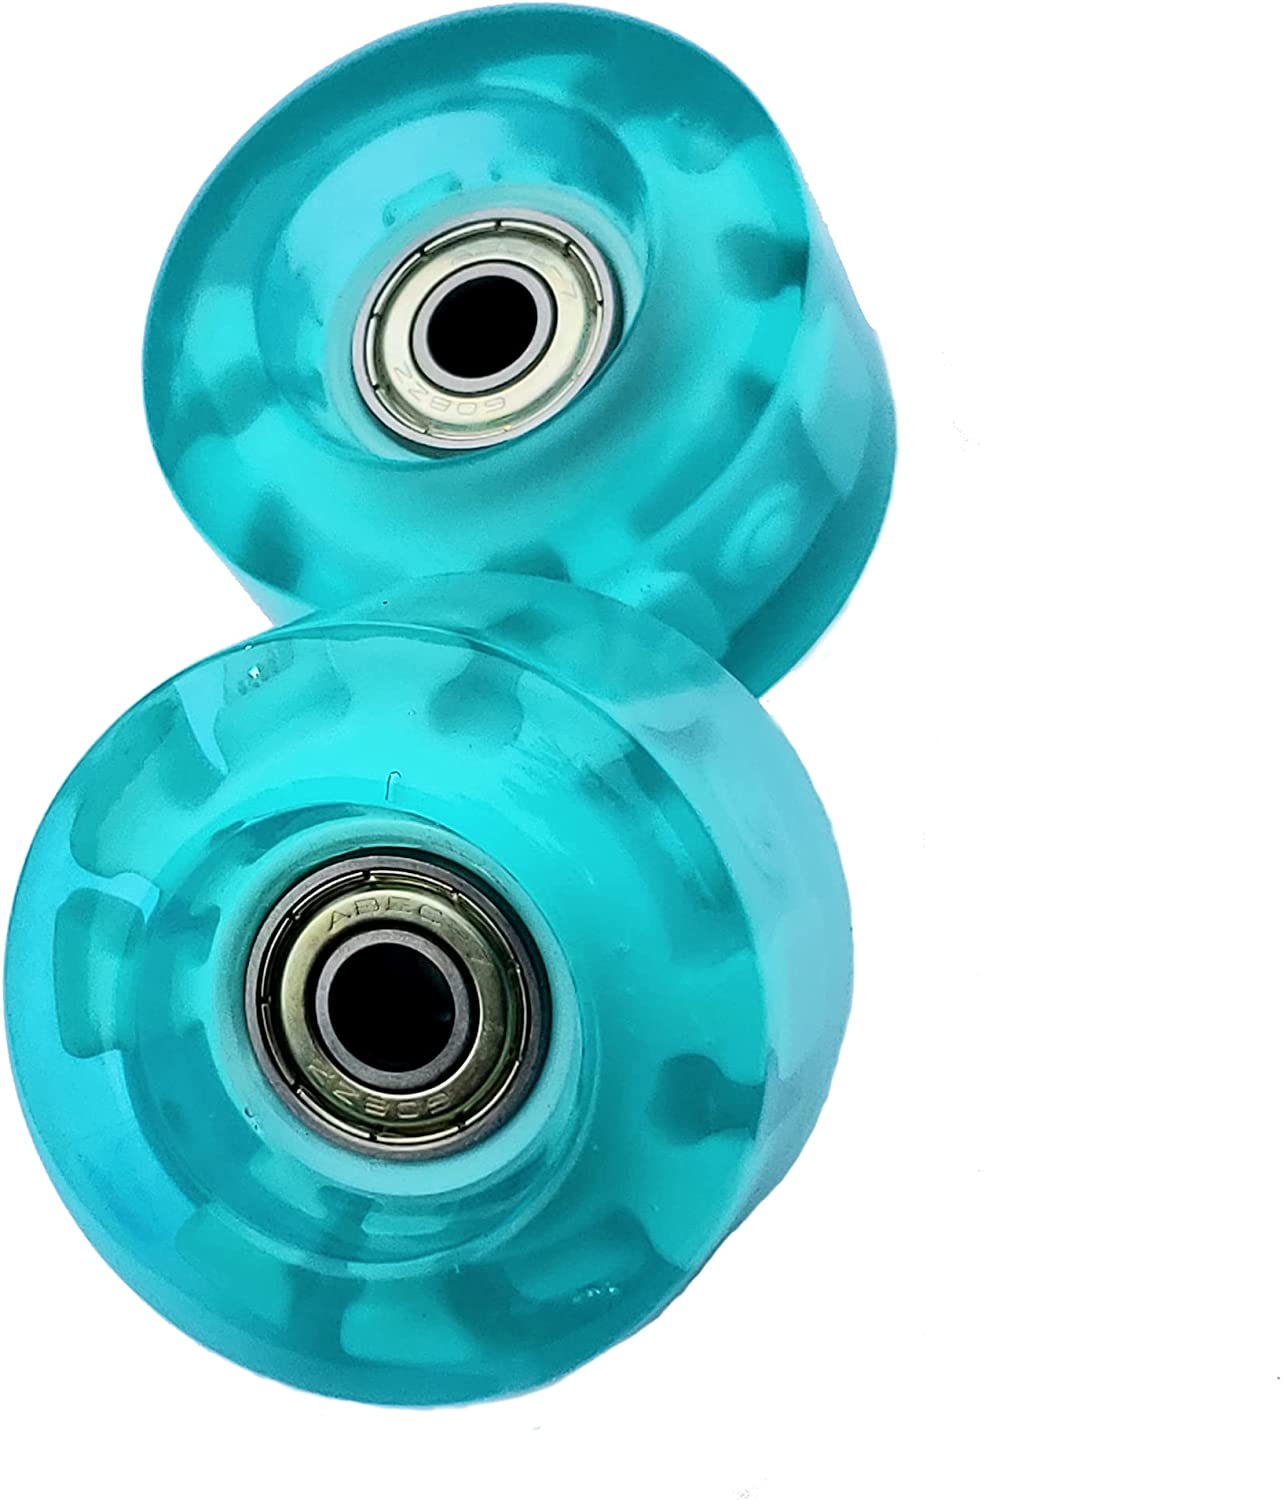 Roller Skates Replacement Wheels - Rainbow | Pack of 2 | Xino Sports - Xino Sports